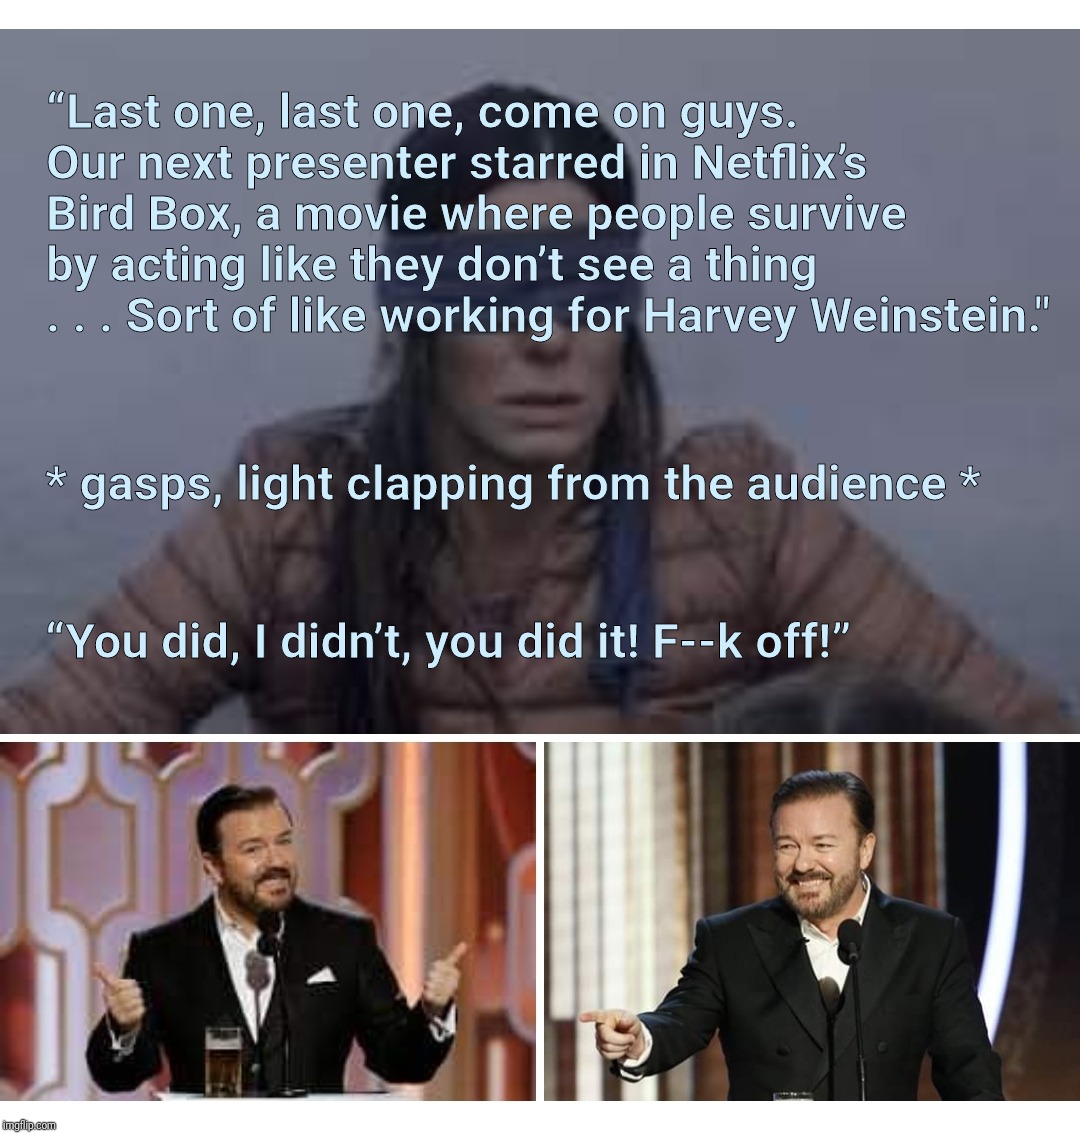 It needed to be said | “Last one, last one, come on guys. Our next presenter starred in Netflix’s Bird Box, a movie where people survive by acting like they don’t see a thing . . . Sort of like working for Harvey Weinstein."; * gasps, light clapping from the audience *; “You did, I didn’t, you did it! F--k off!” | image tagged in memes,ricky gervais,harvey weinstein,golden globes,metoo,scumbag hollywood | made w/ Imgflip meme maker